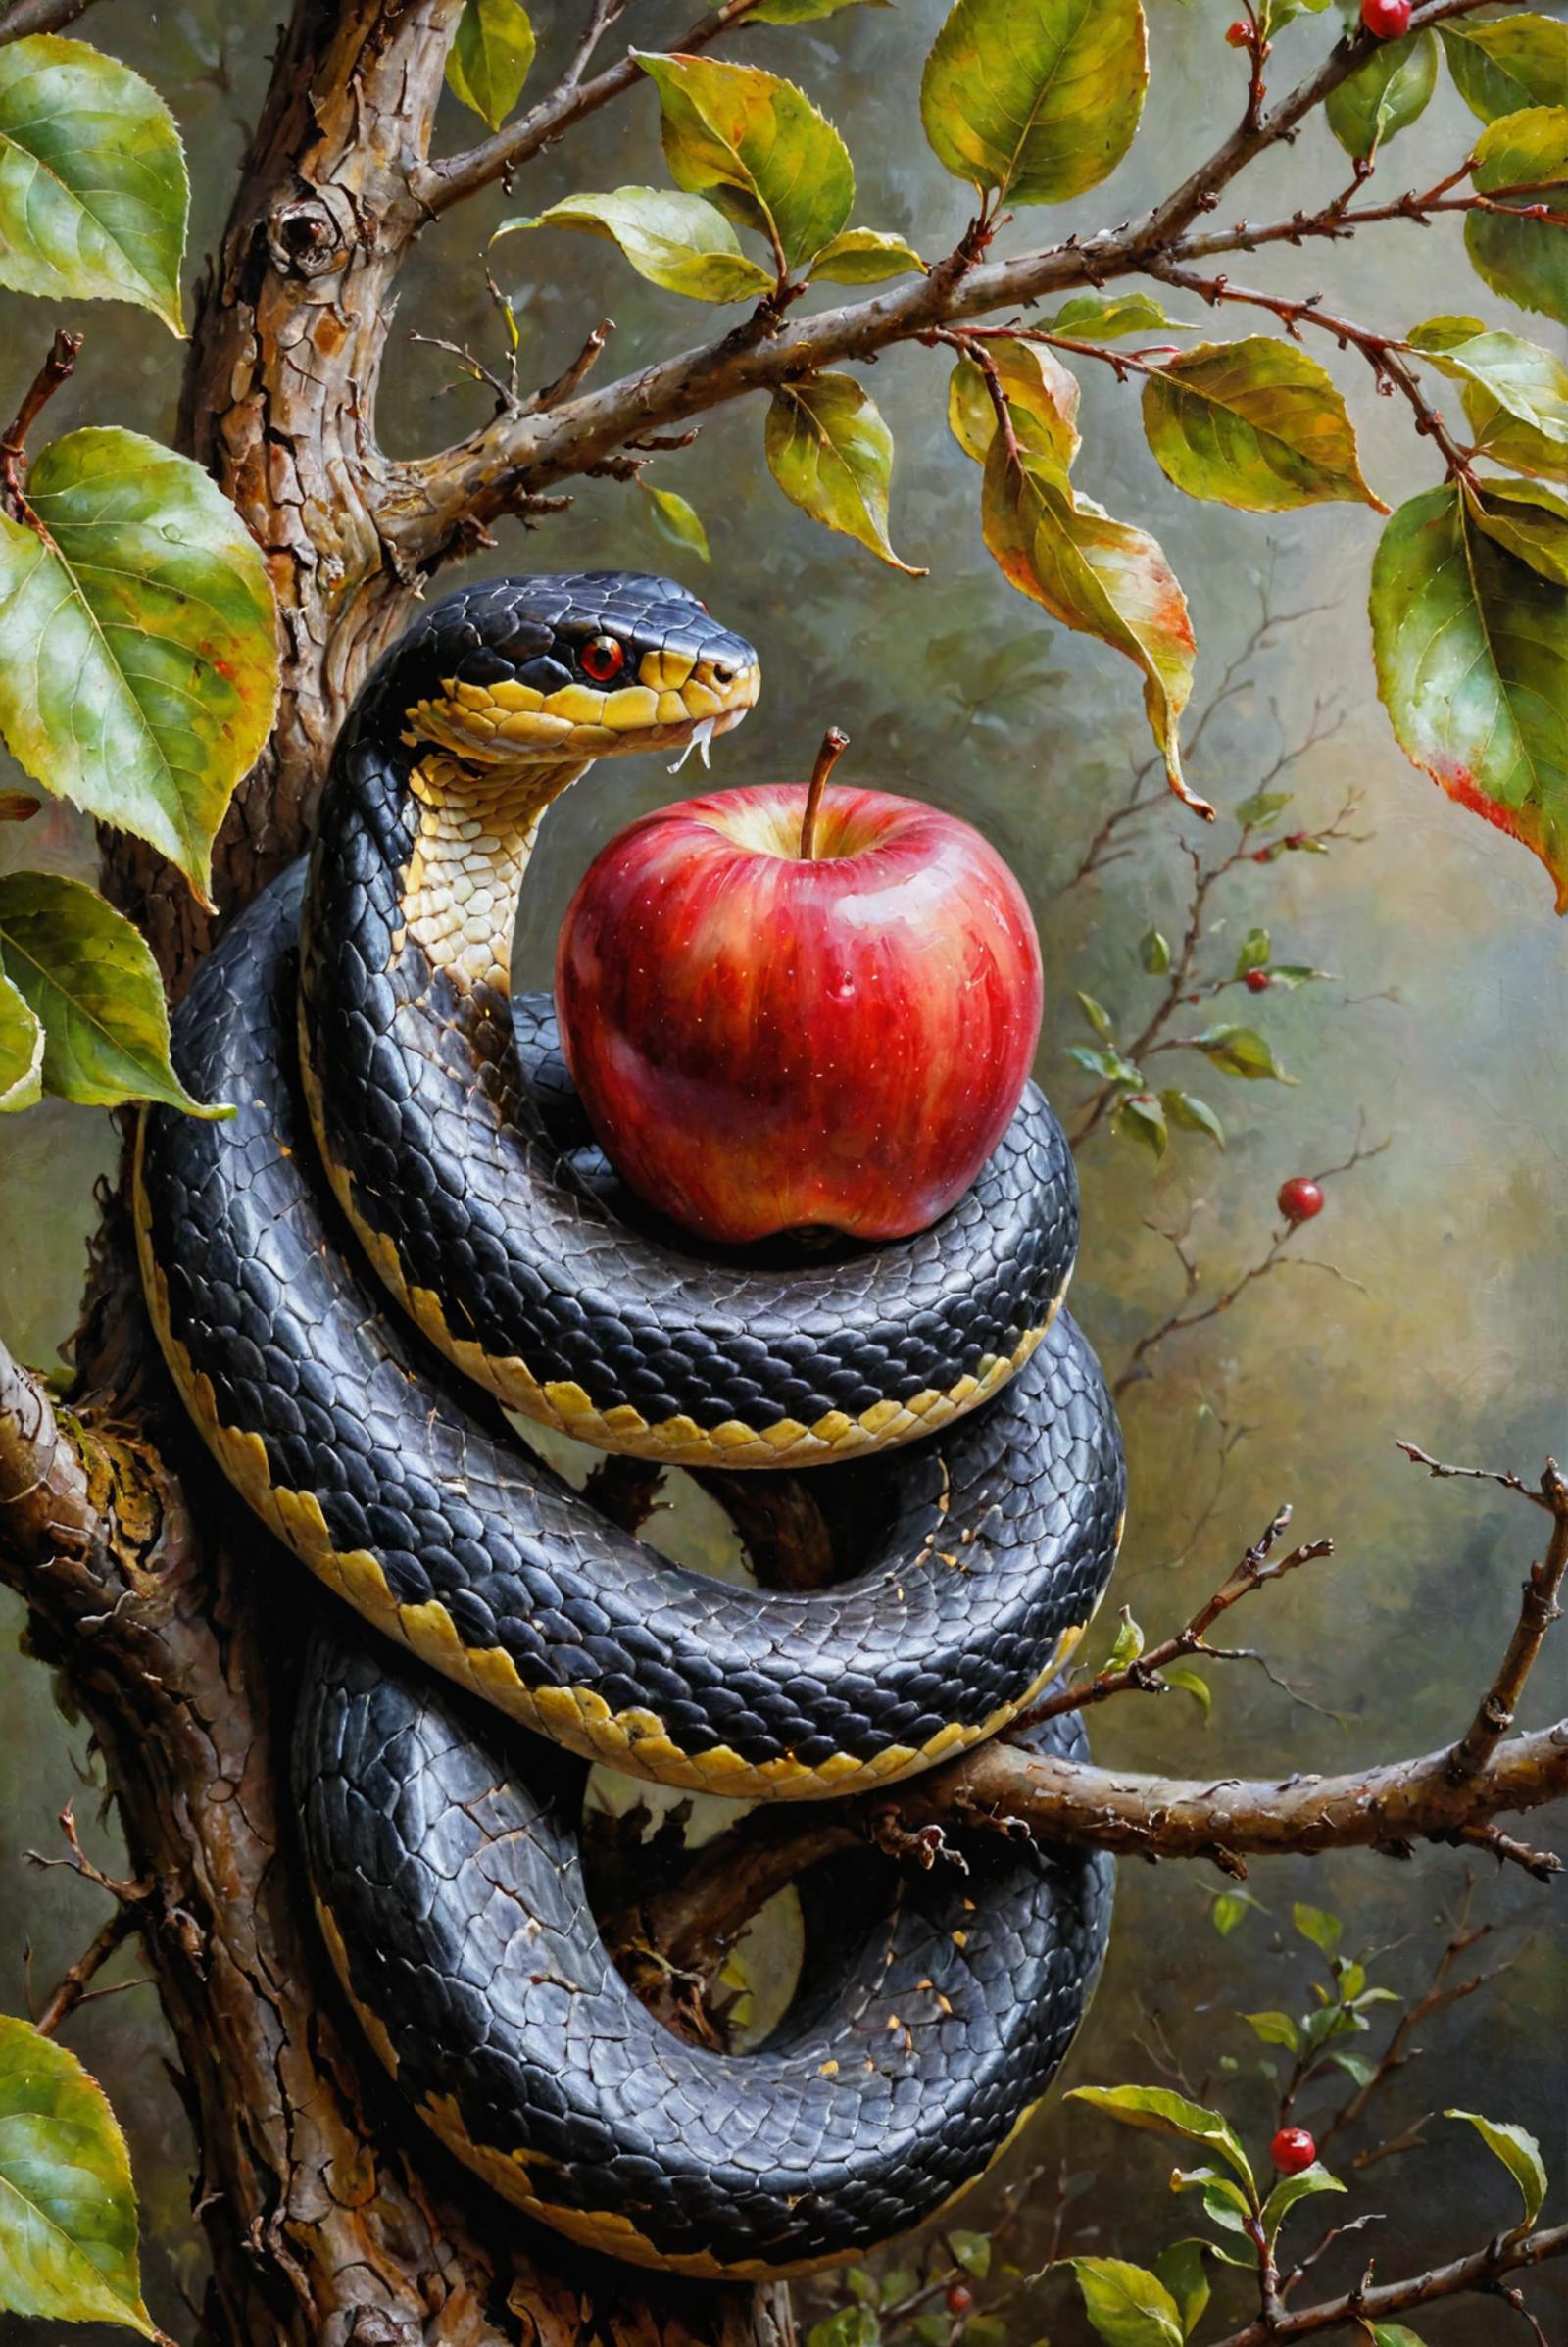 An artistic painting of a snake holding an apple in its mouth, surrounded by leaves and branches.